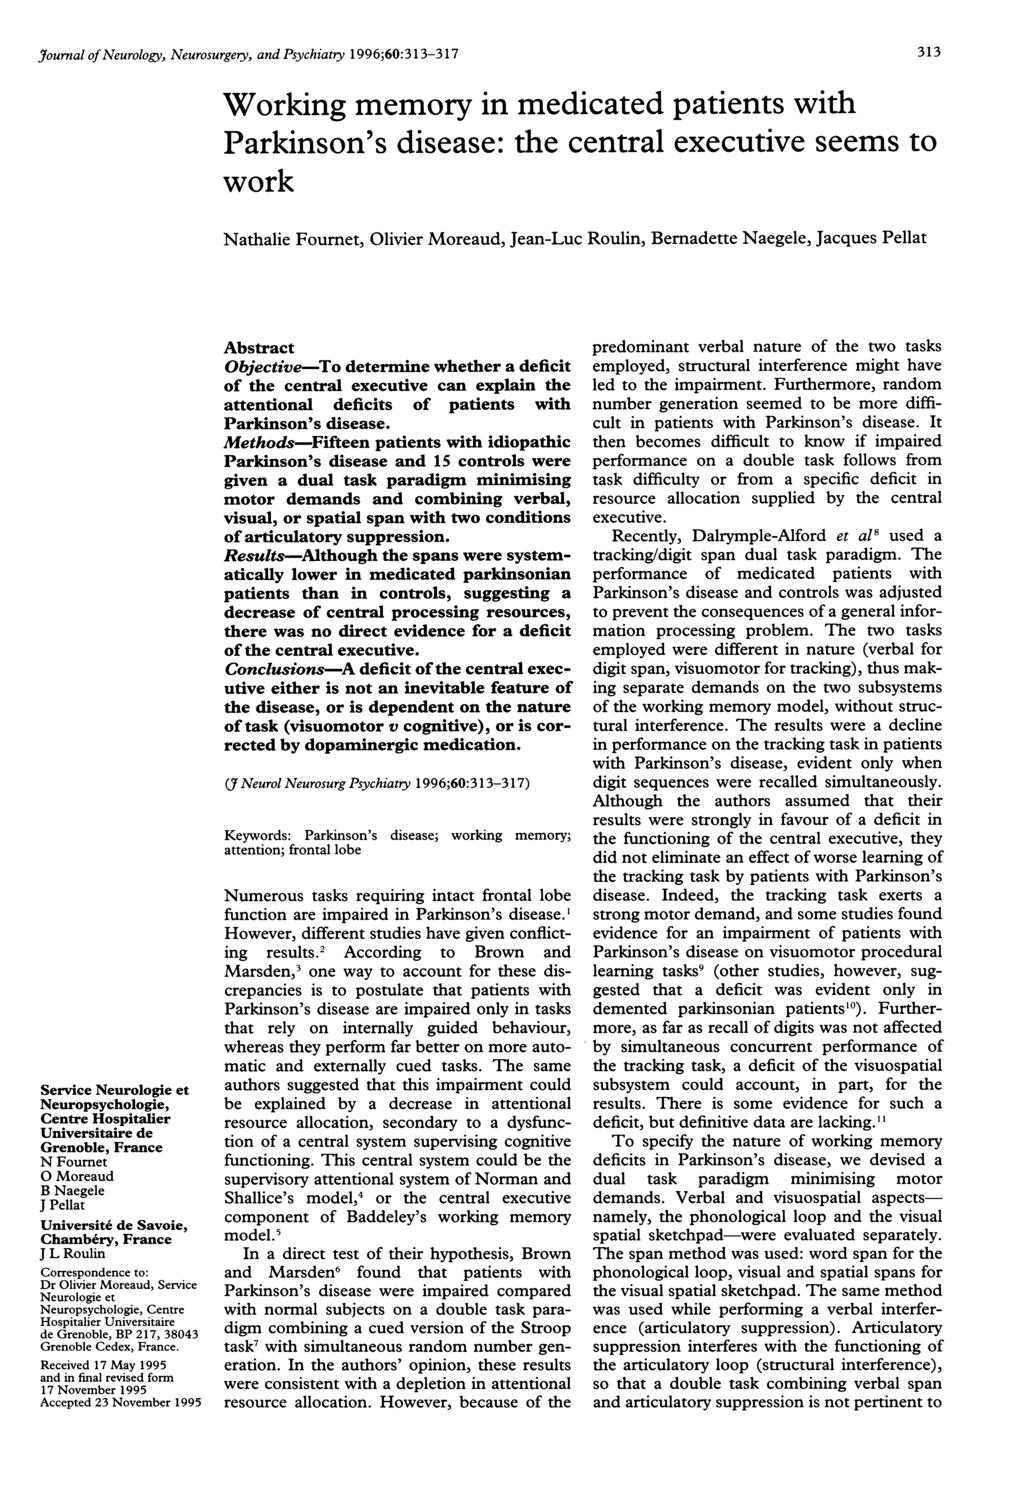 J7ournal of Neurology, Neurosurgery, and Psychiatry 1996;60:313-317 Working memory in medicated patients with Parkinson's disease: the central executive seems to work Nathalie Fournet, Olivier